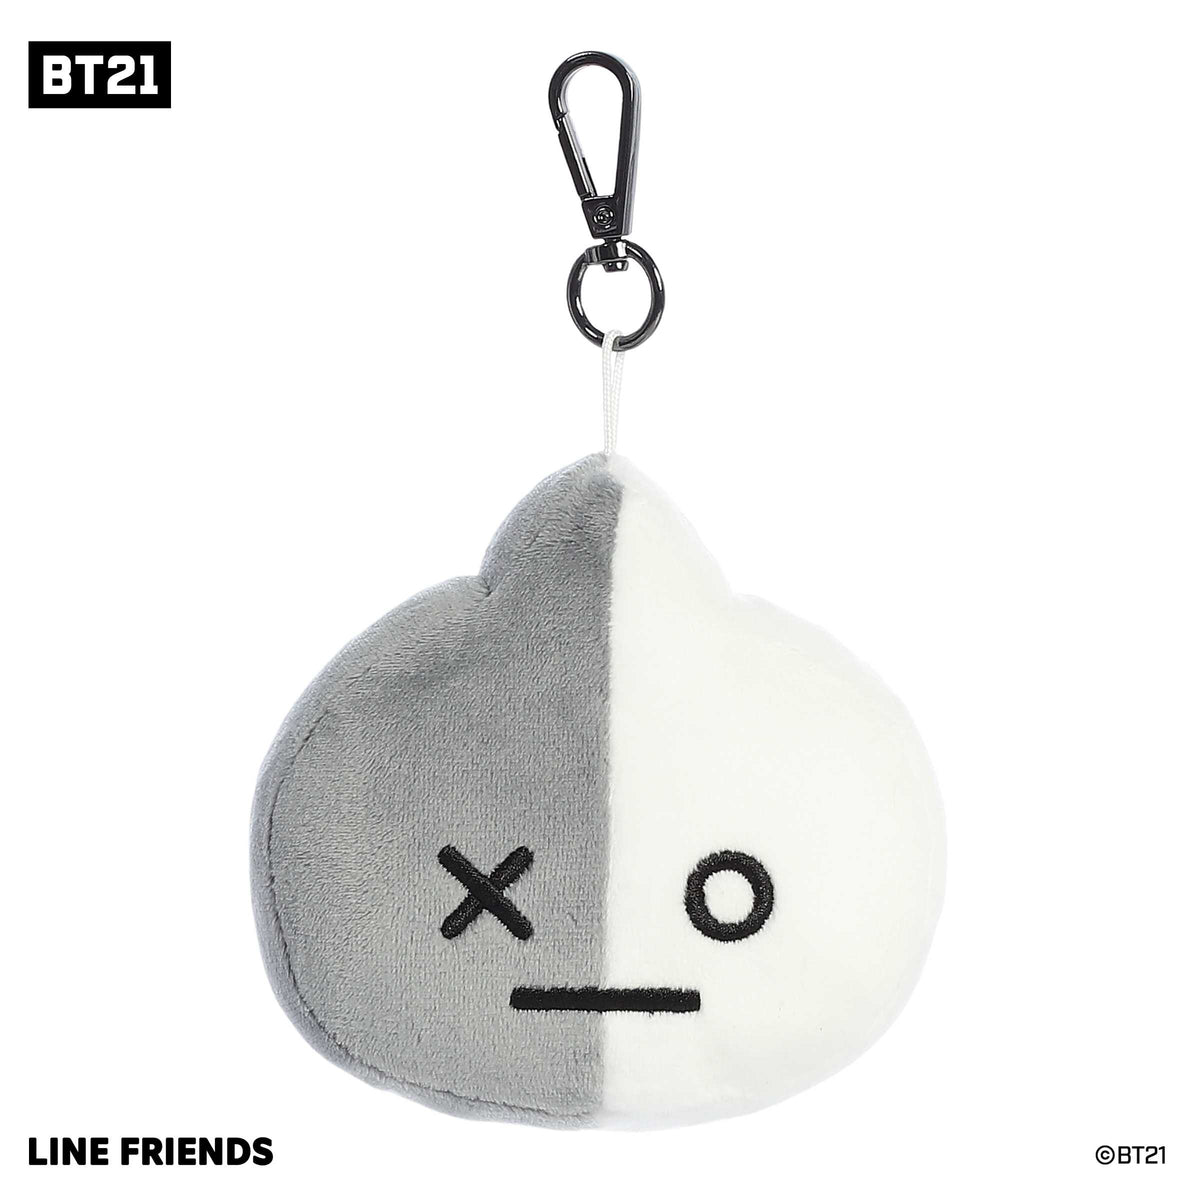 Cute Trendy BT21 plush Clip-On with a gray and white soft mini body, black accents on face, and an attached metal hook